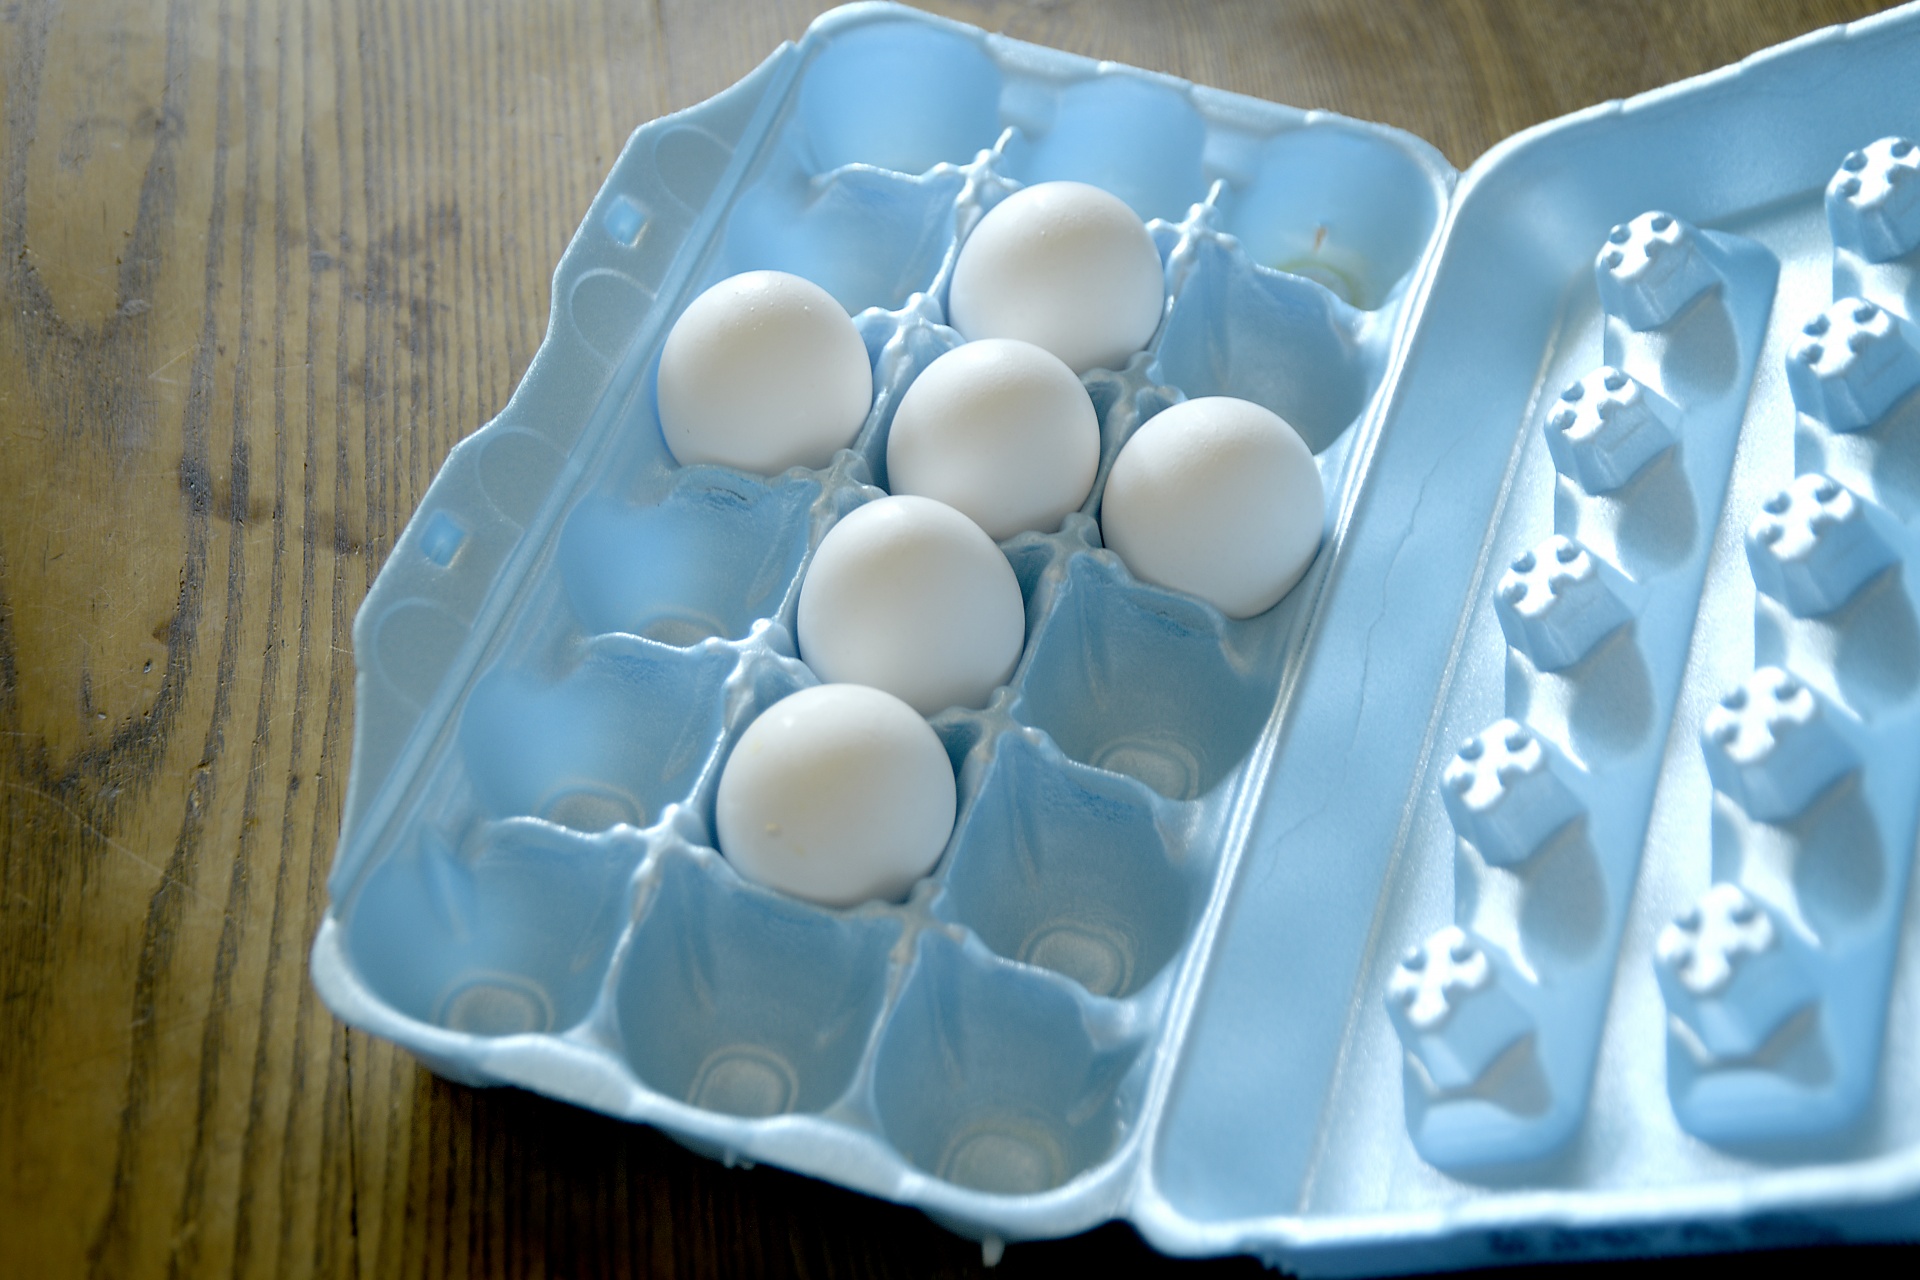 Eggs in an egg carton in the shape of a cross